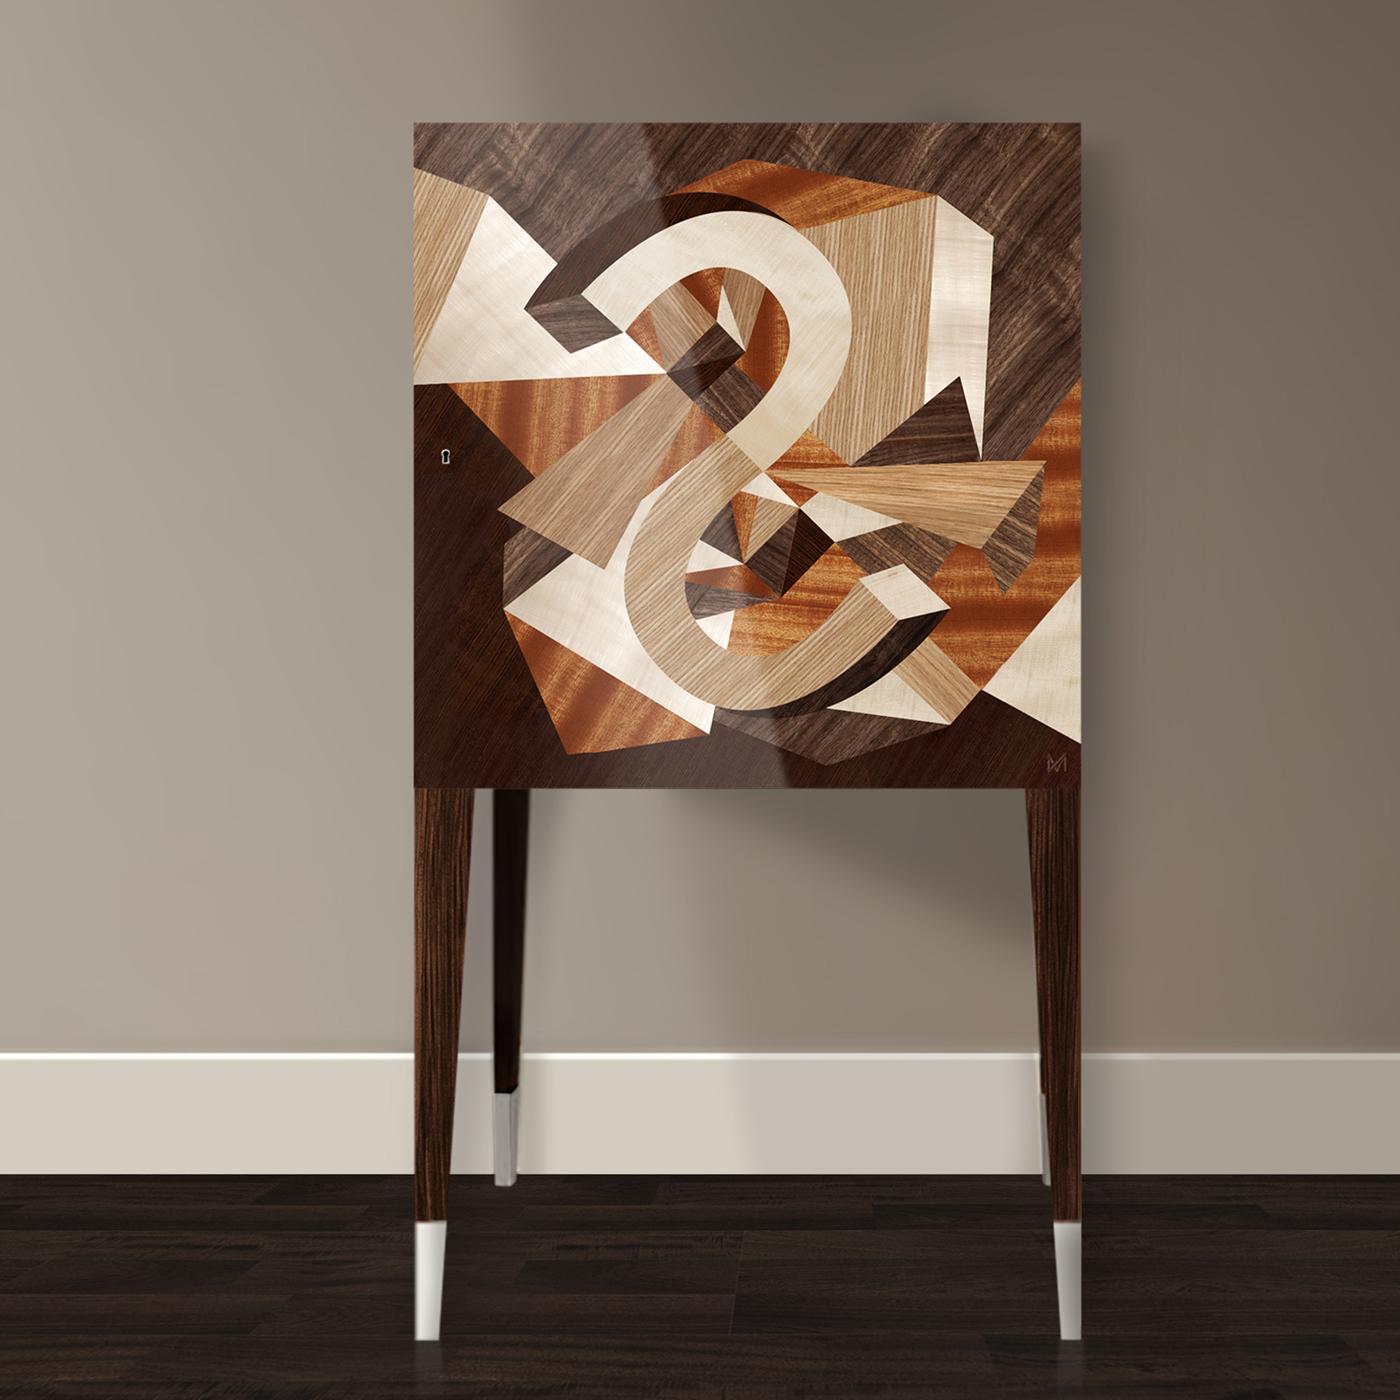 Inlays from five different kinds of wood define the door of this bar cabinet, freely mixed together in an abstract design of great visual effect. Entirely handcrafted, the rosewood frame is supported by tall, slender legs accented with polished